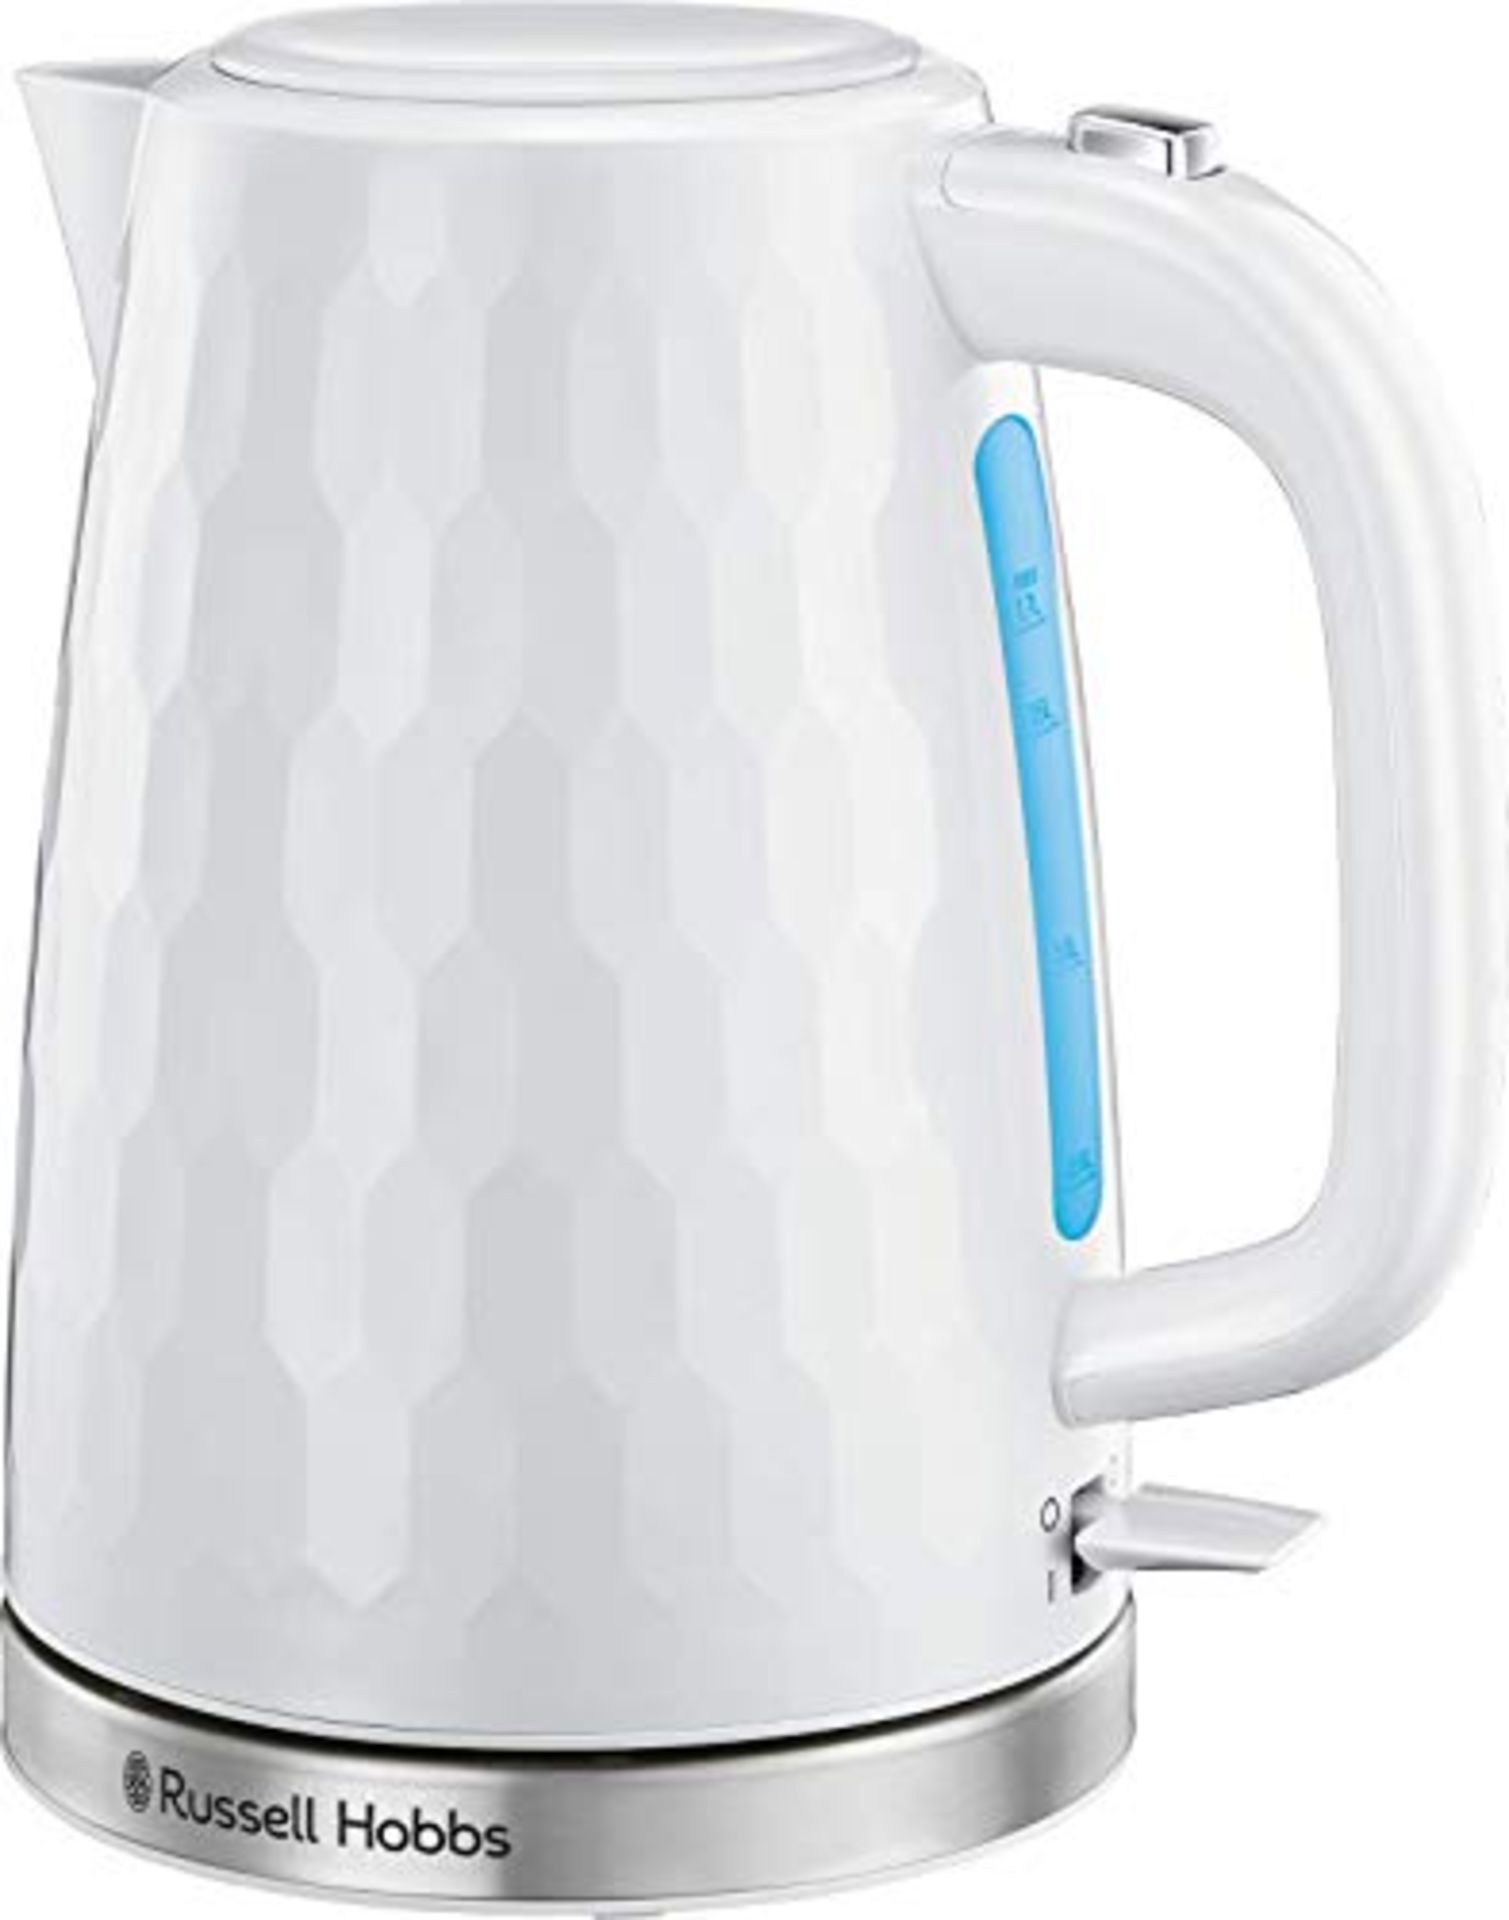 Russell Hobbs 26050 Cordless Electric Kettle - Contemporary Honeycomb Design with Fast